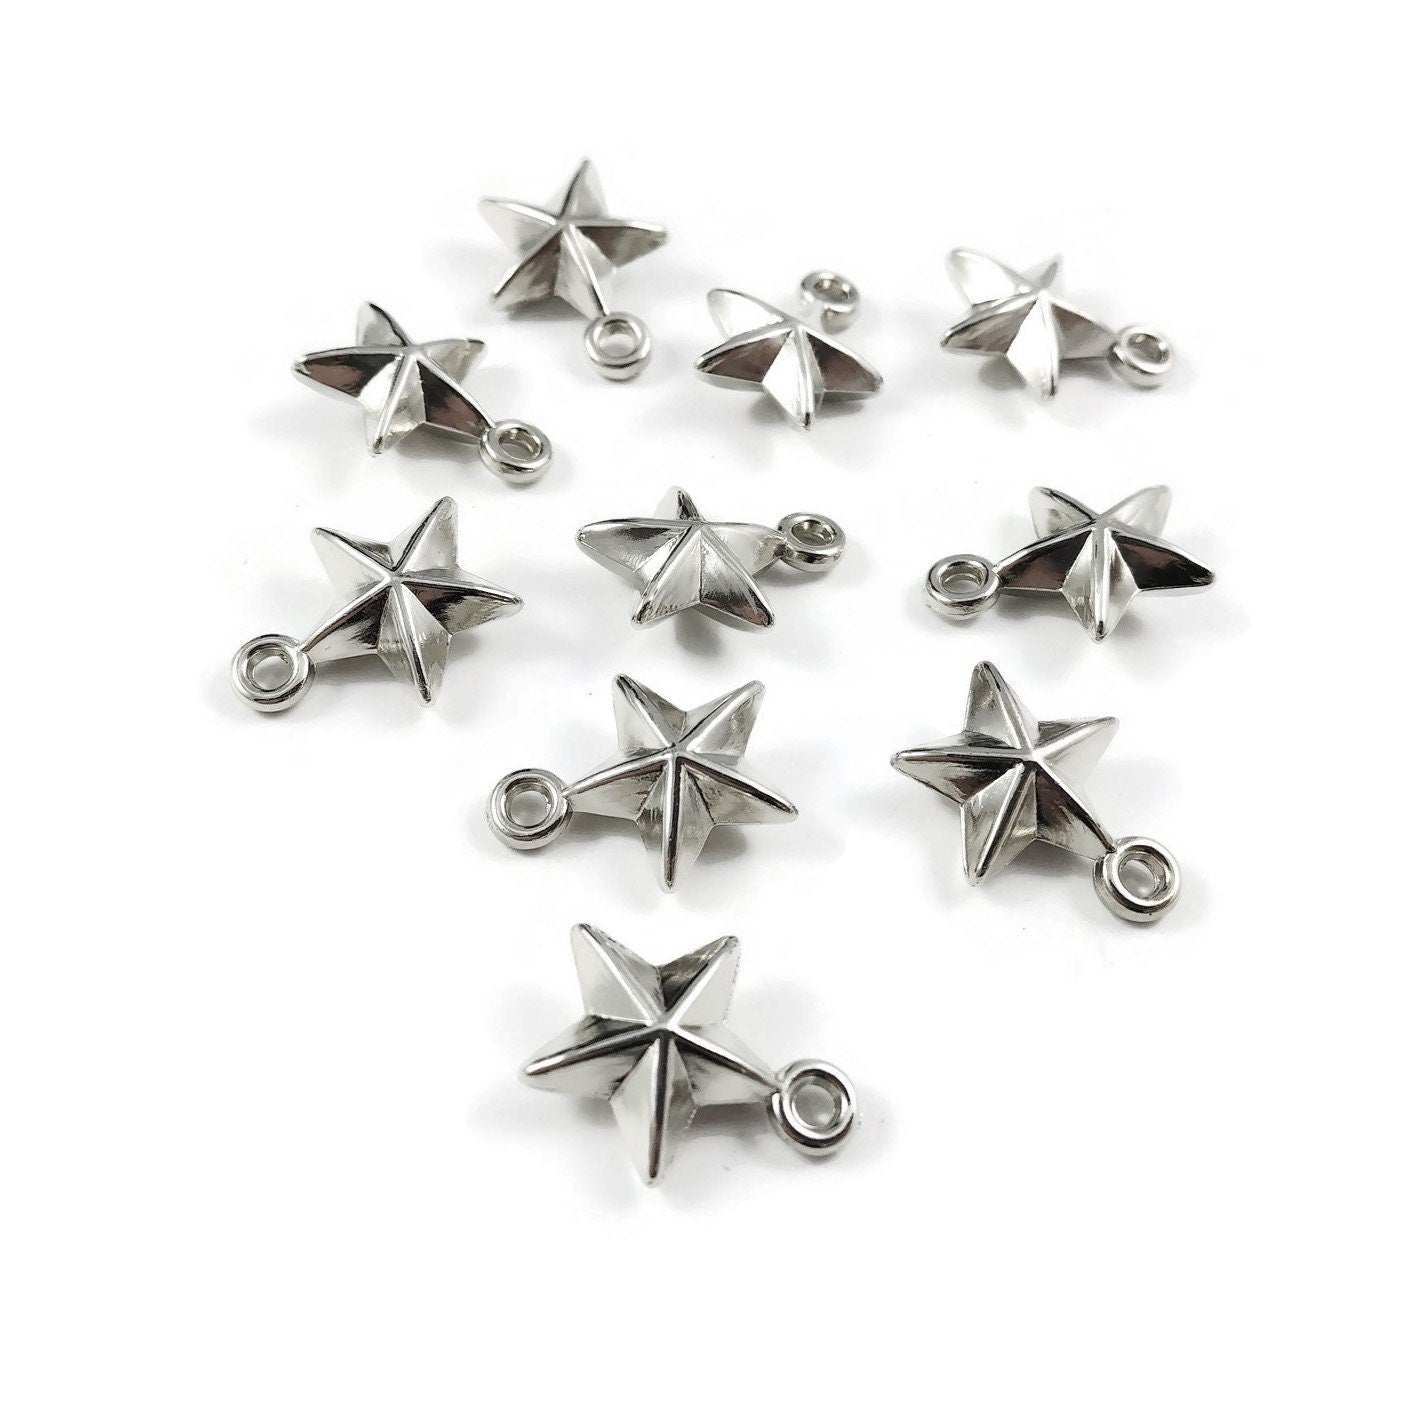 Silver star charms, Acrylic celestial charms, Small star pendants for jewelry making, Earring or bracelet charms